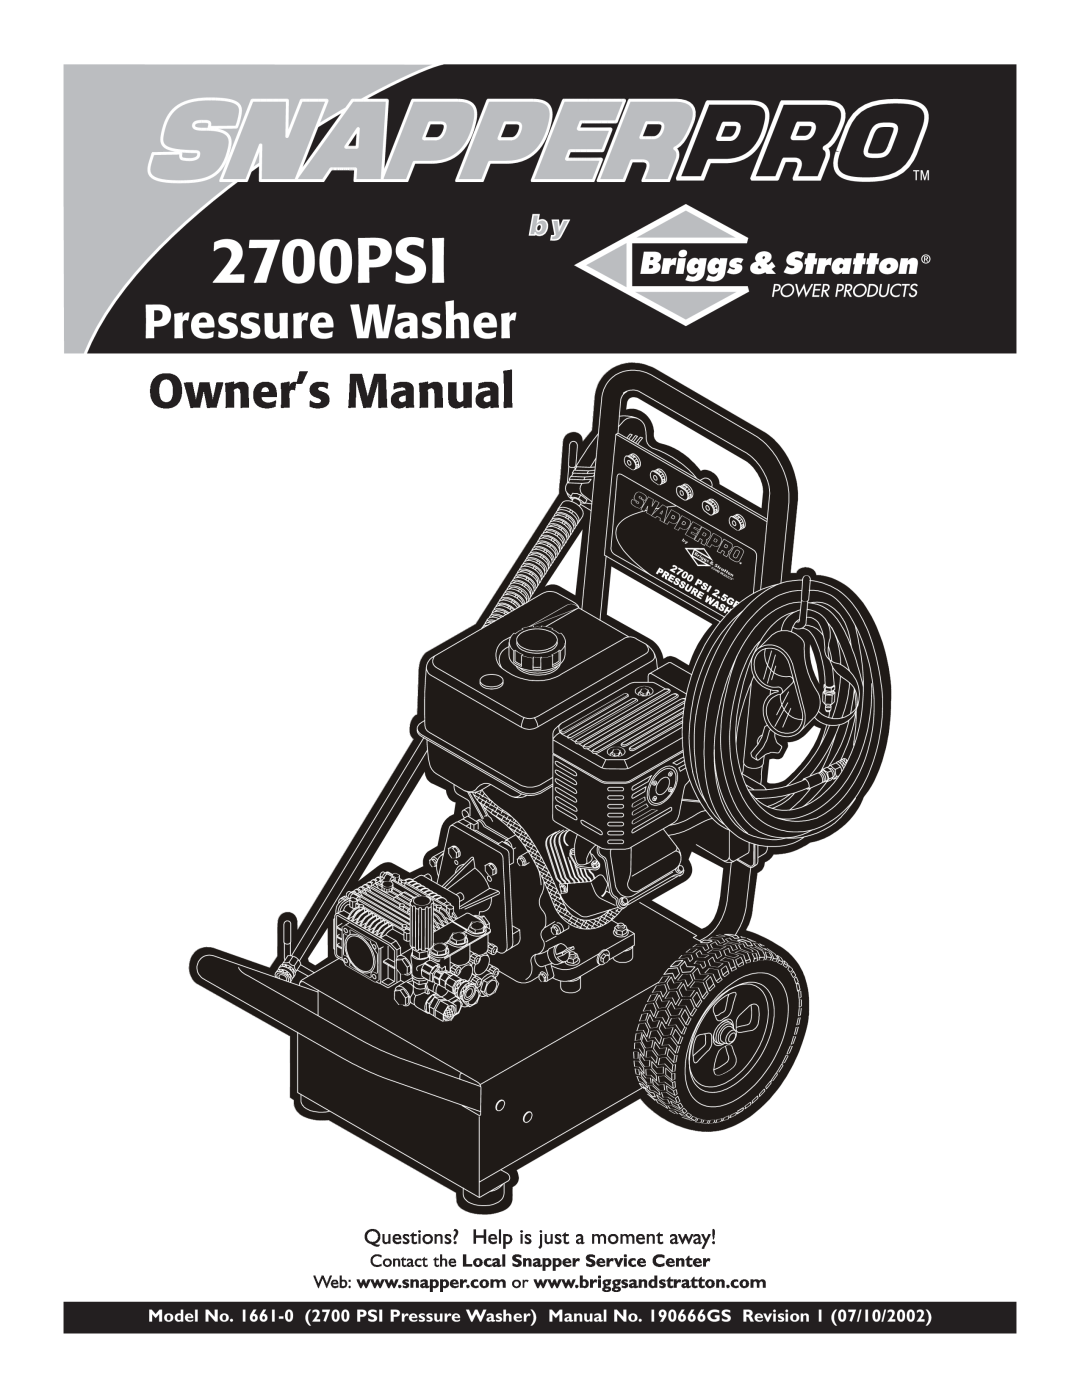 Snapper 1661-0 owner manual Contact the Local Snapper Service Center, 2700PSI, Pressure Washer 